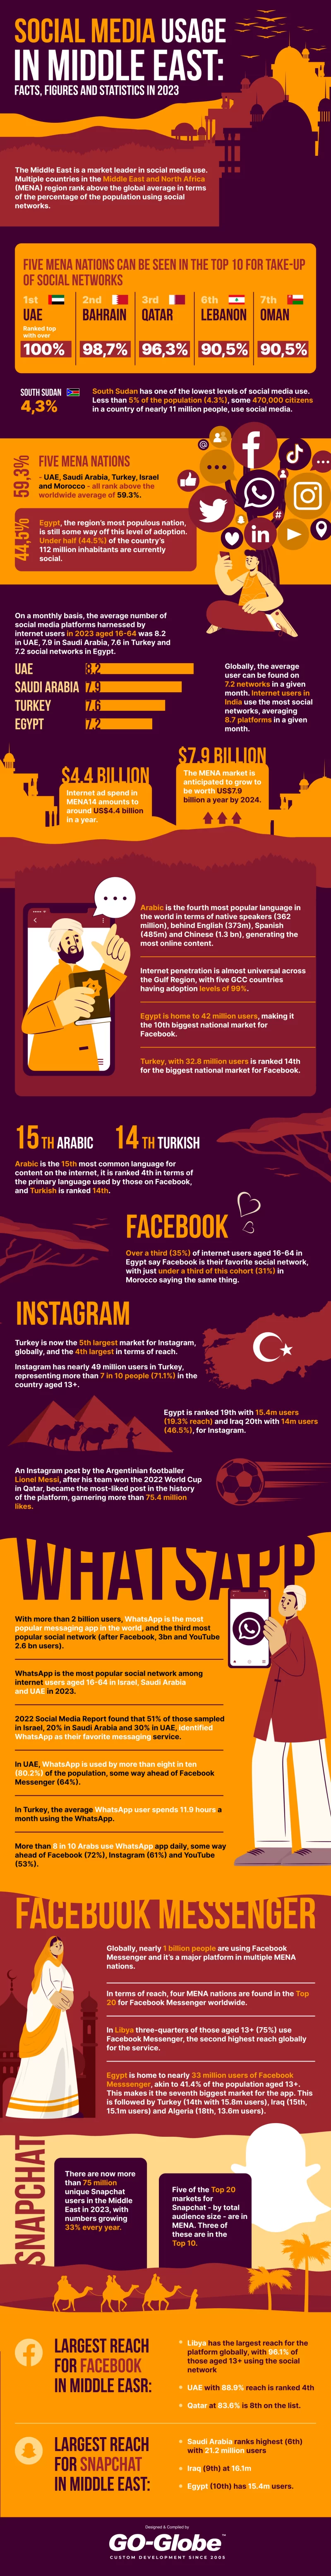 Social Media Usage in Middle East